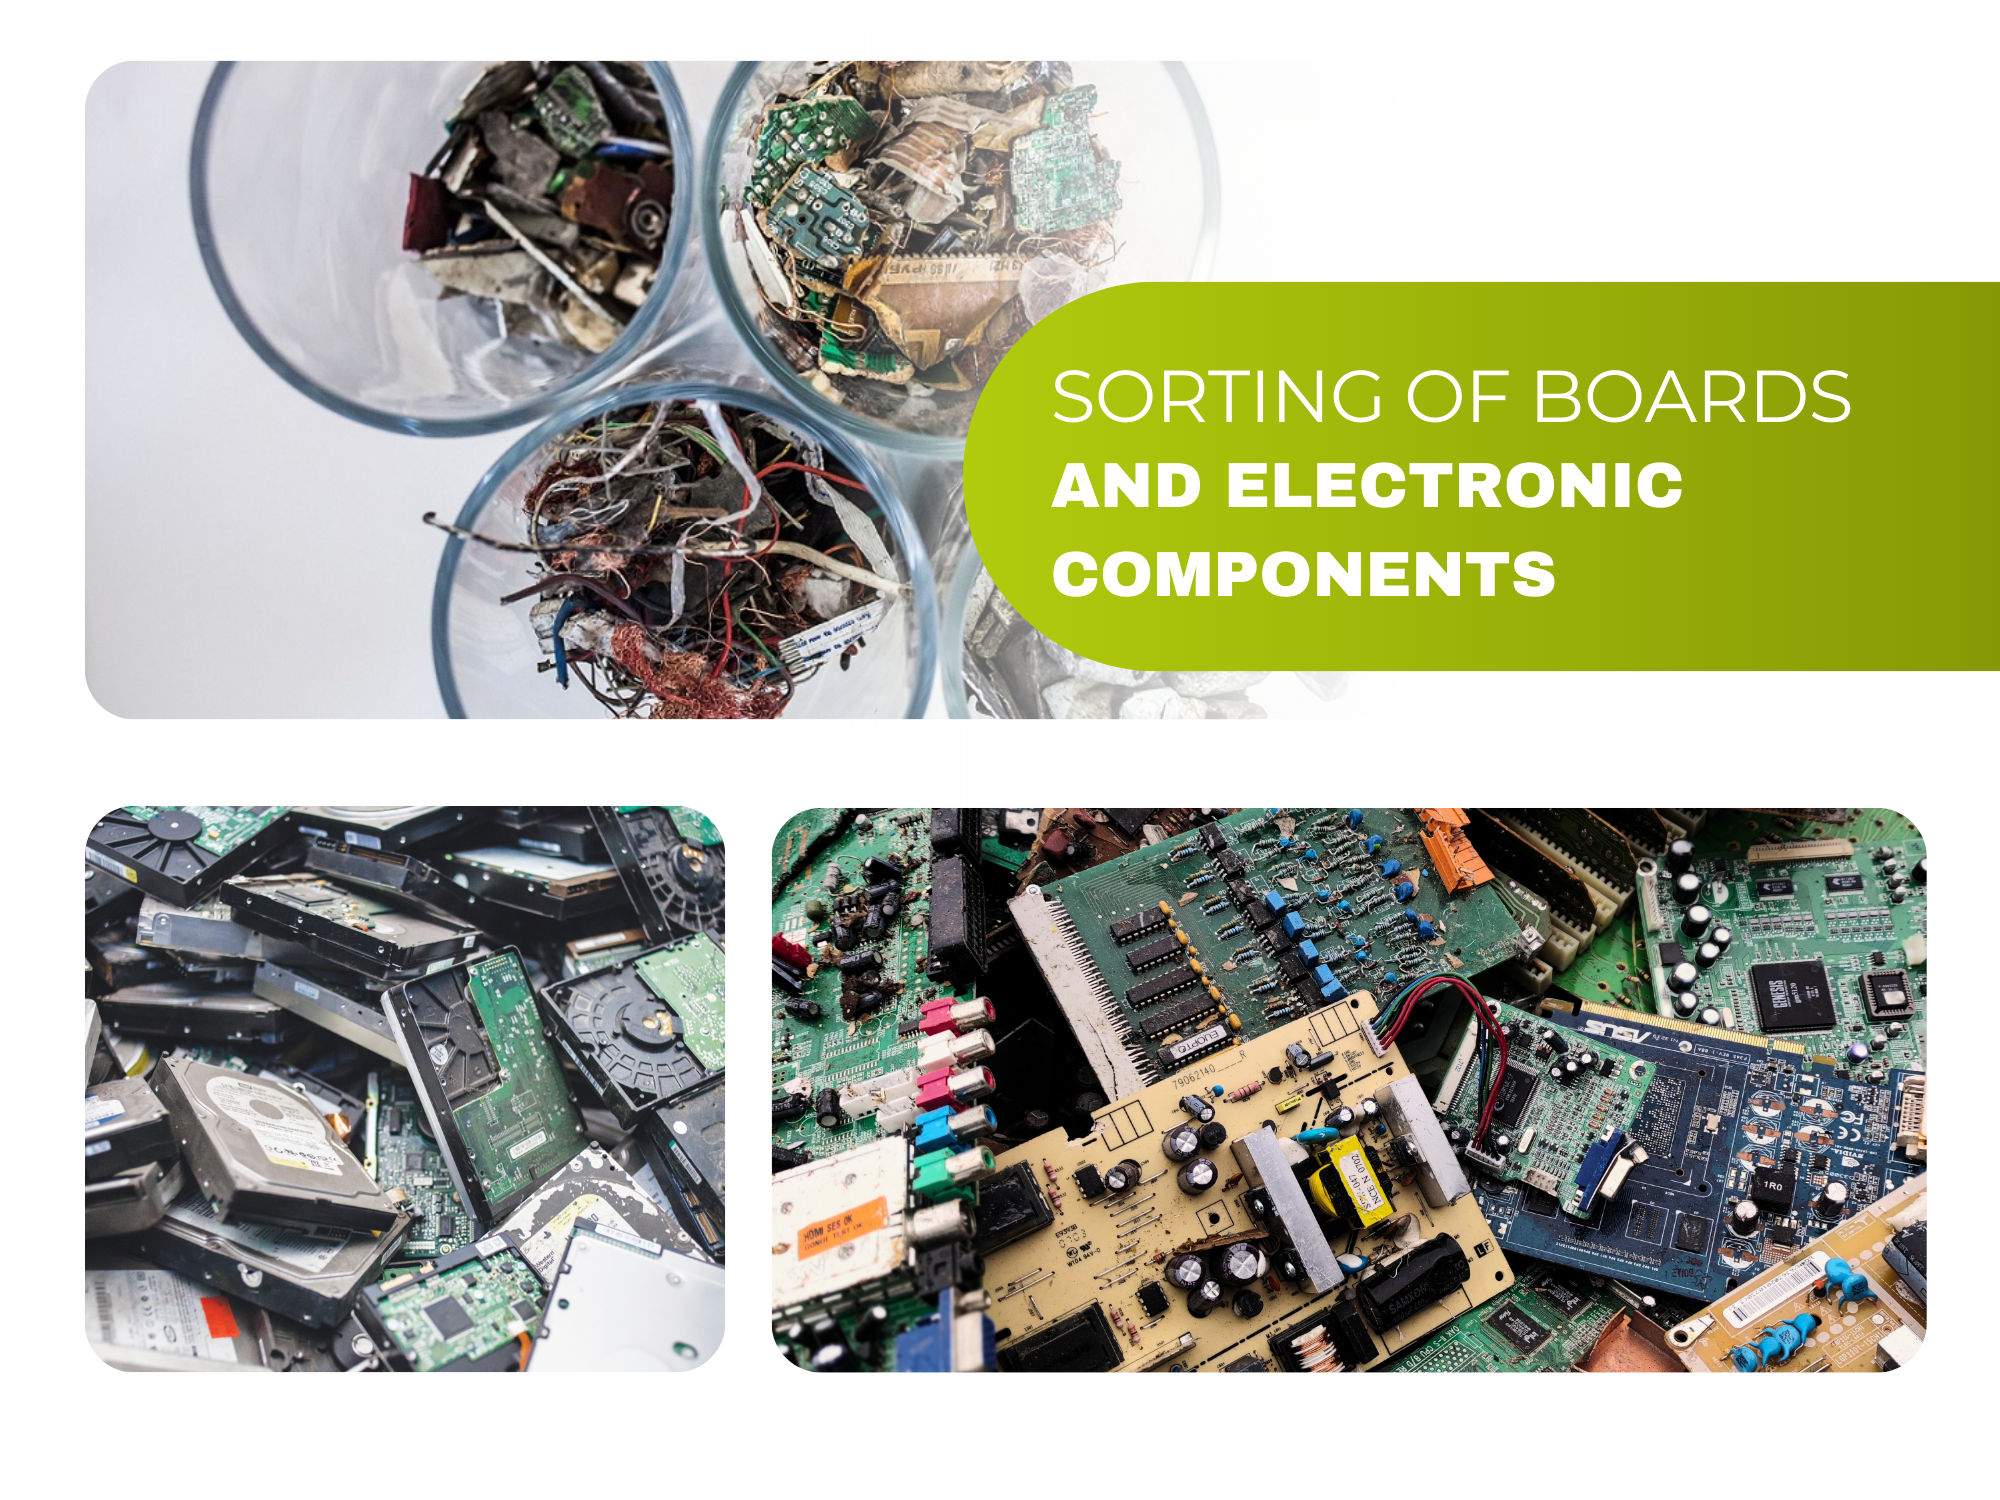 Sorting of boards and electronic components